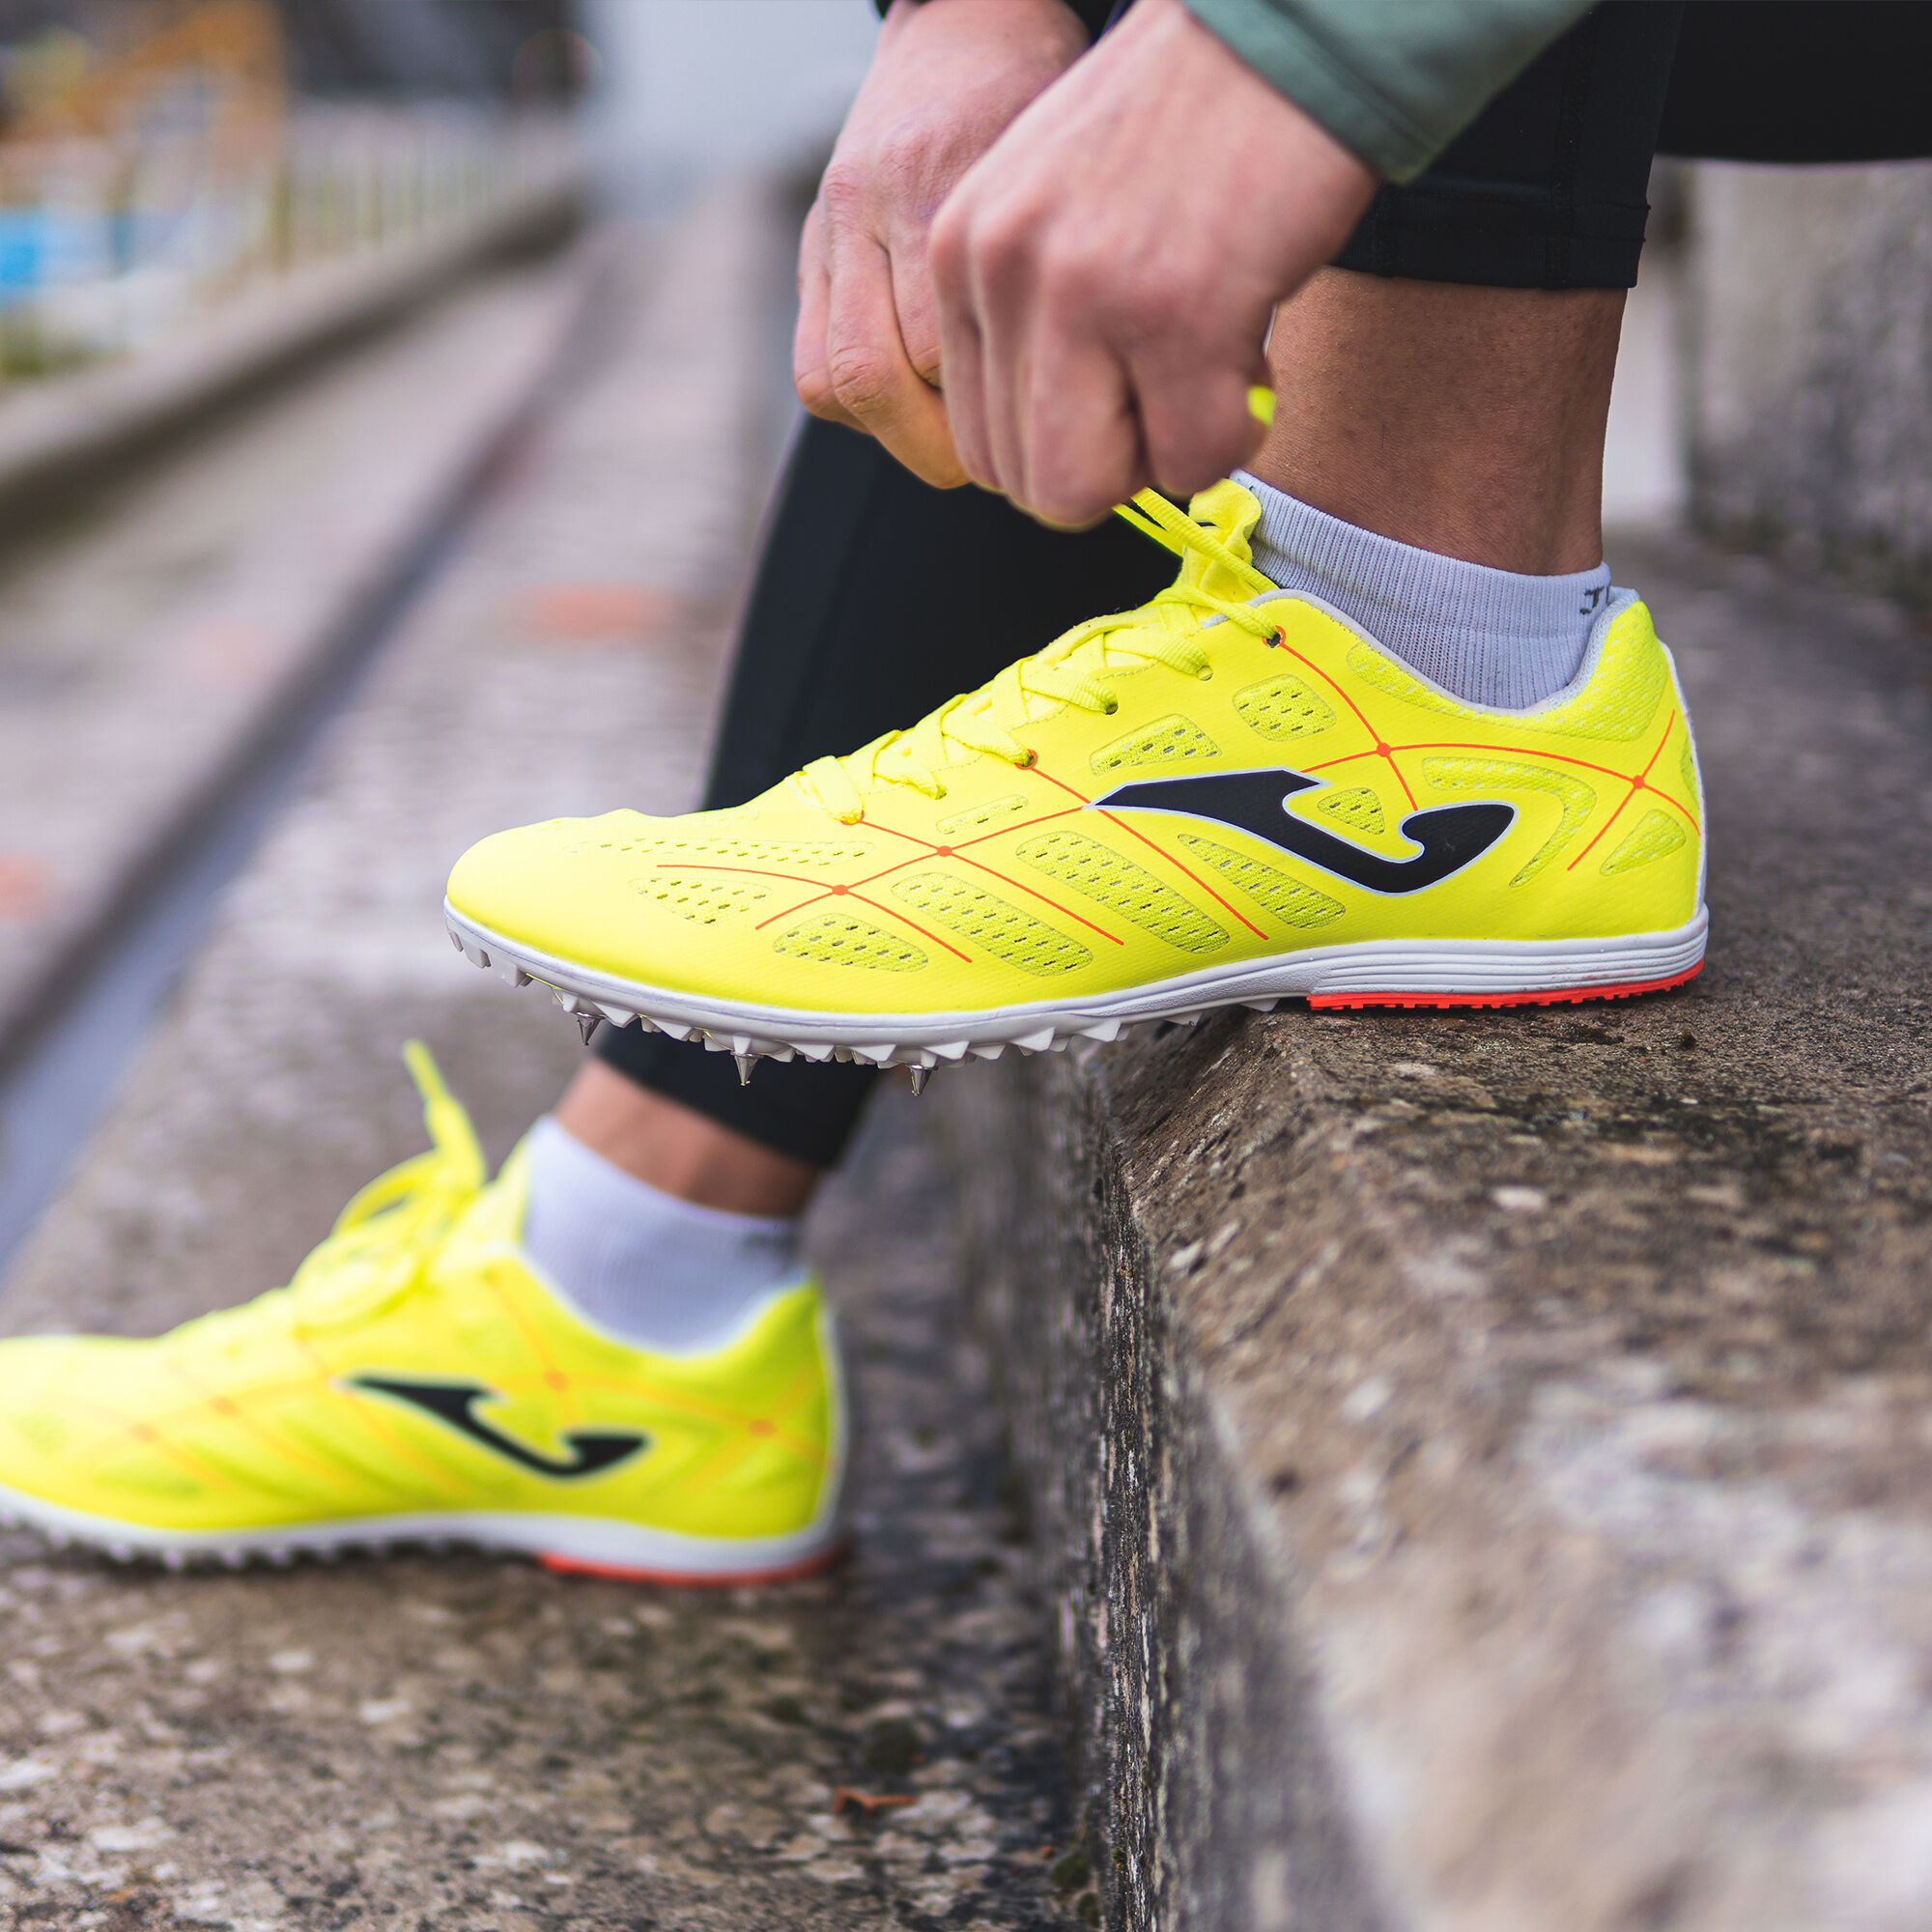 RUNNING SHOES 6729 SPIKES CLAVES UNISEX FLUORESCENT YELLOW